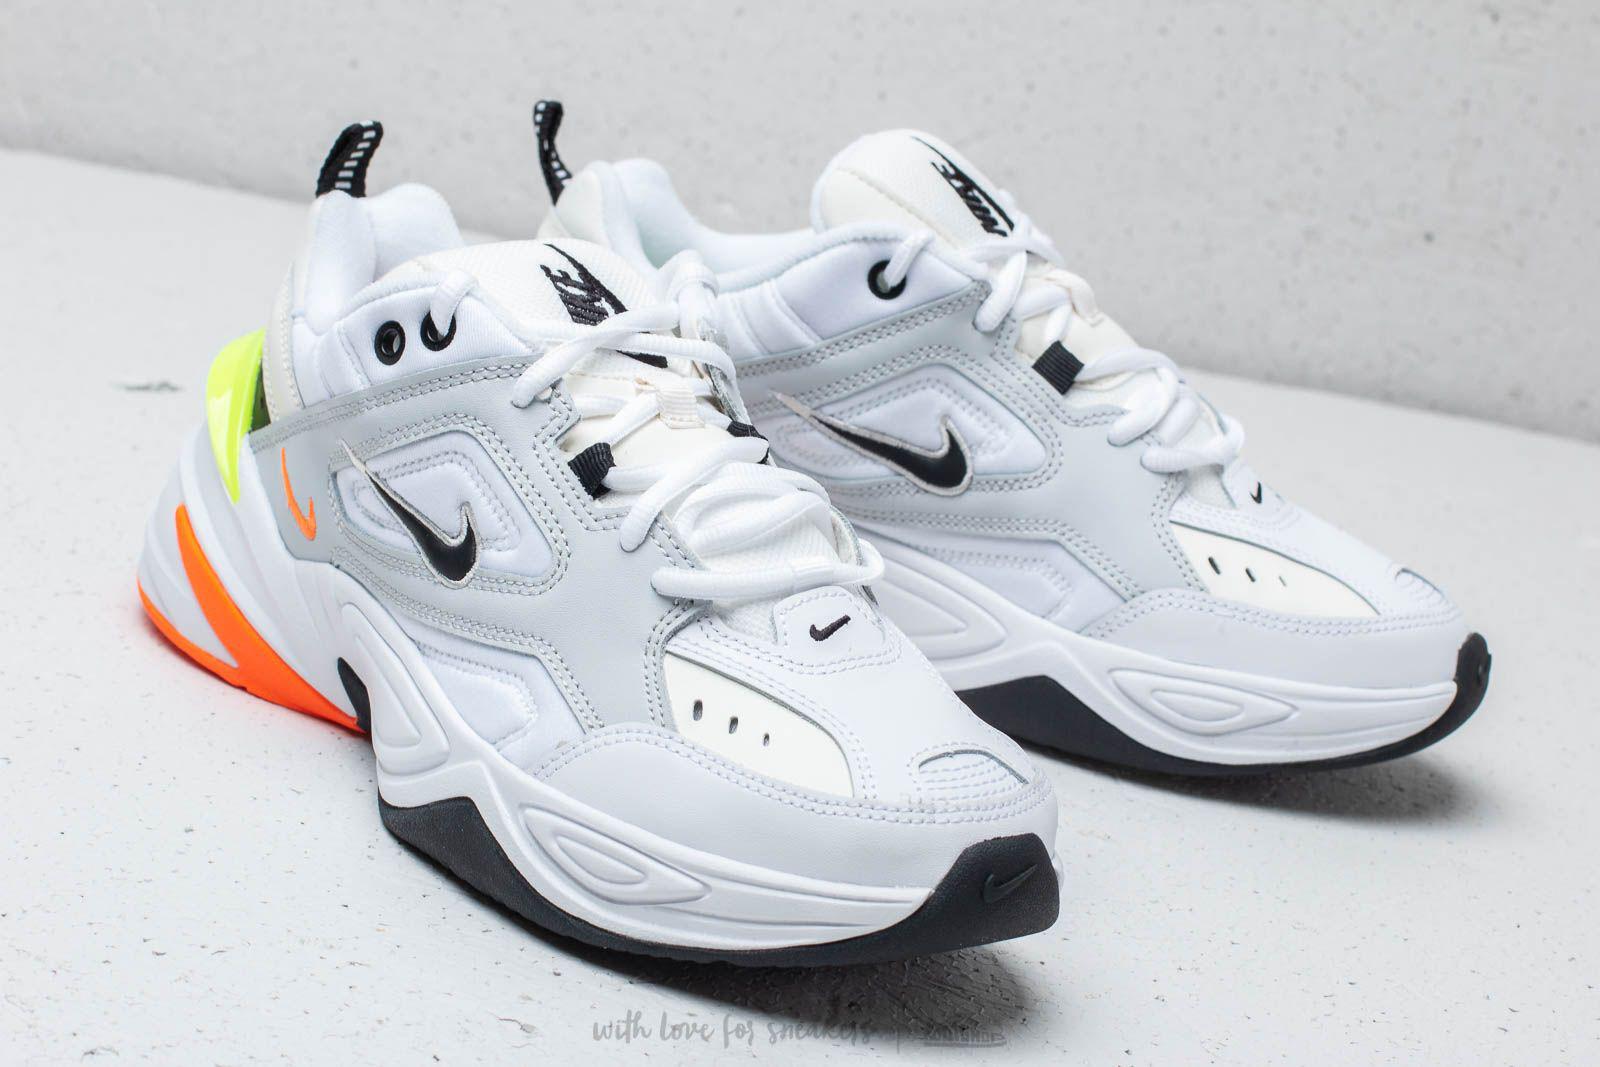 nike m2k tekno footshop,Save up to 19%,www.mapautomacao.com.br